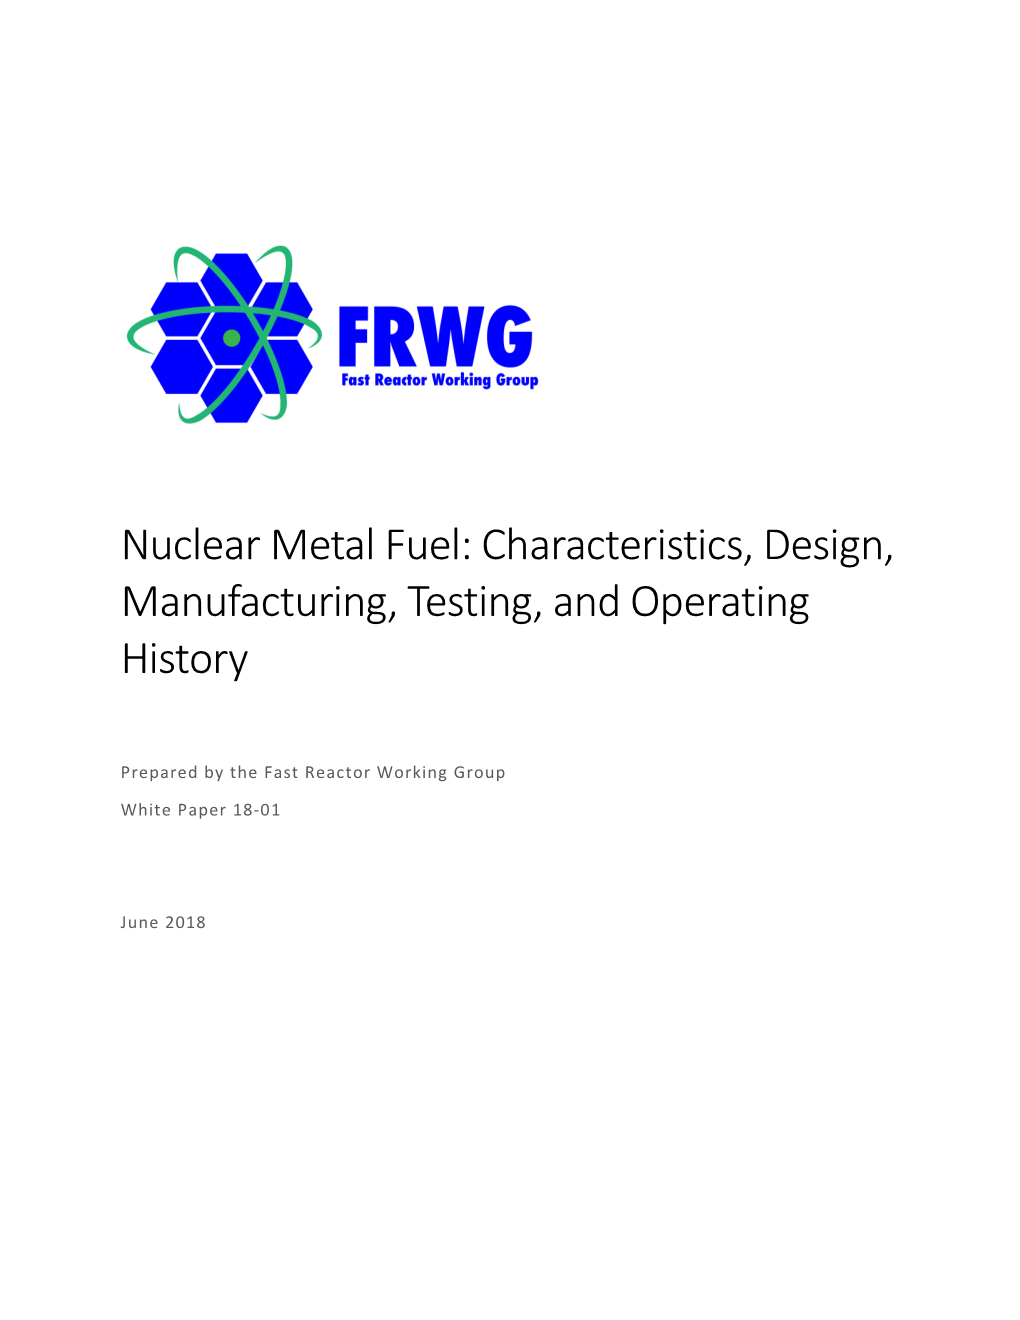 Fast Reactor Working Group